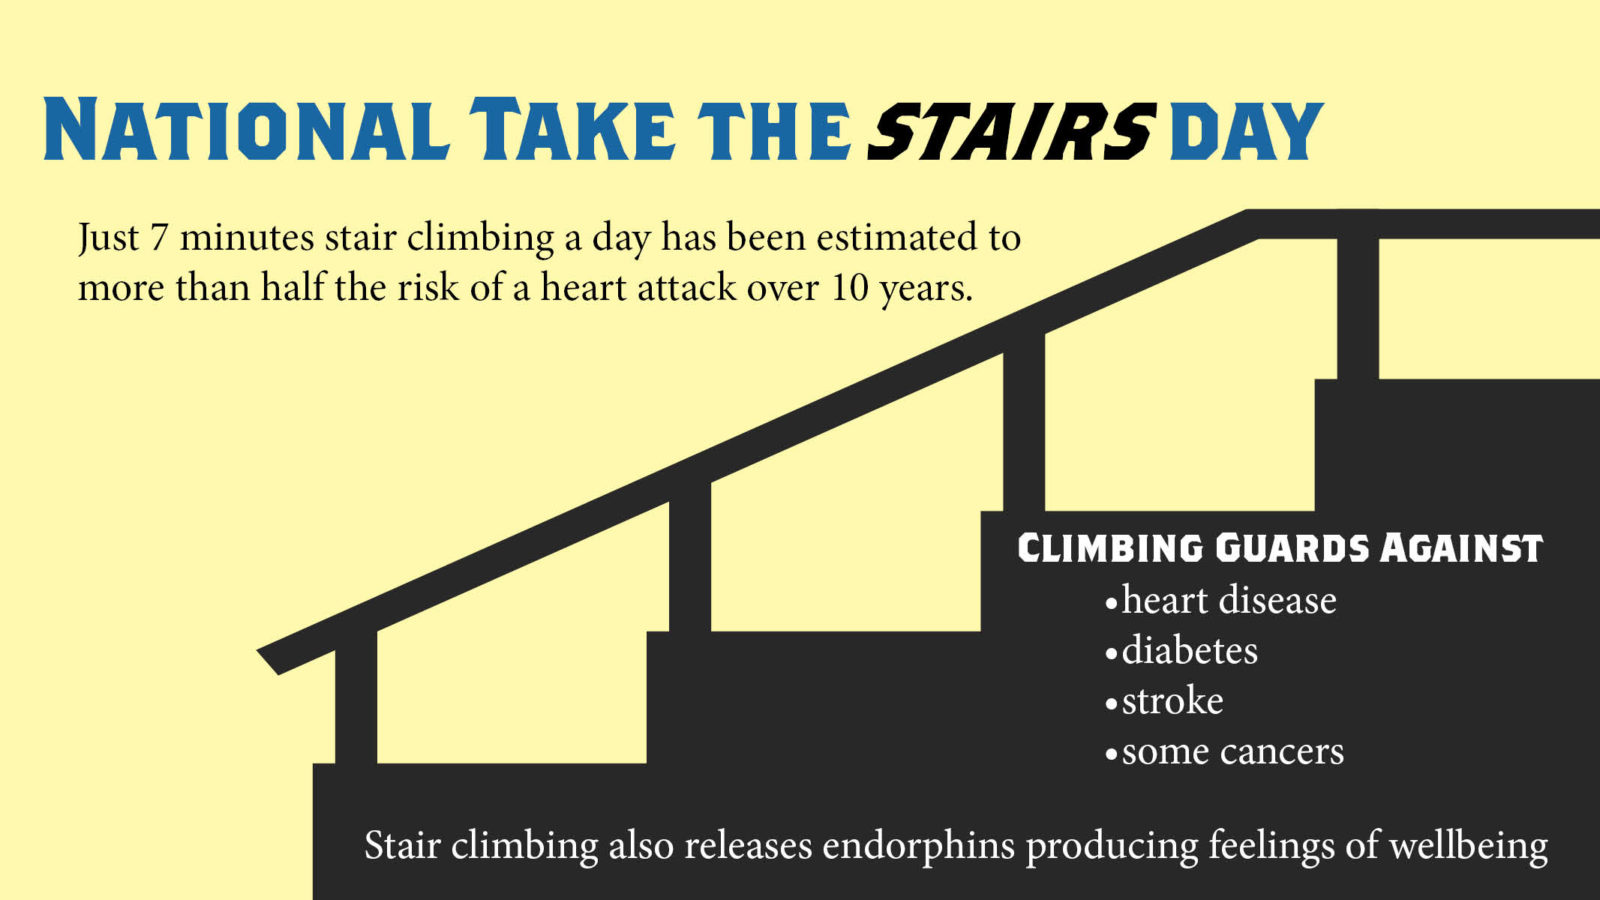 January newsletter example for take the stairs day